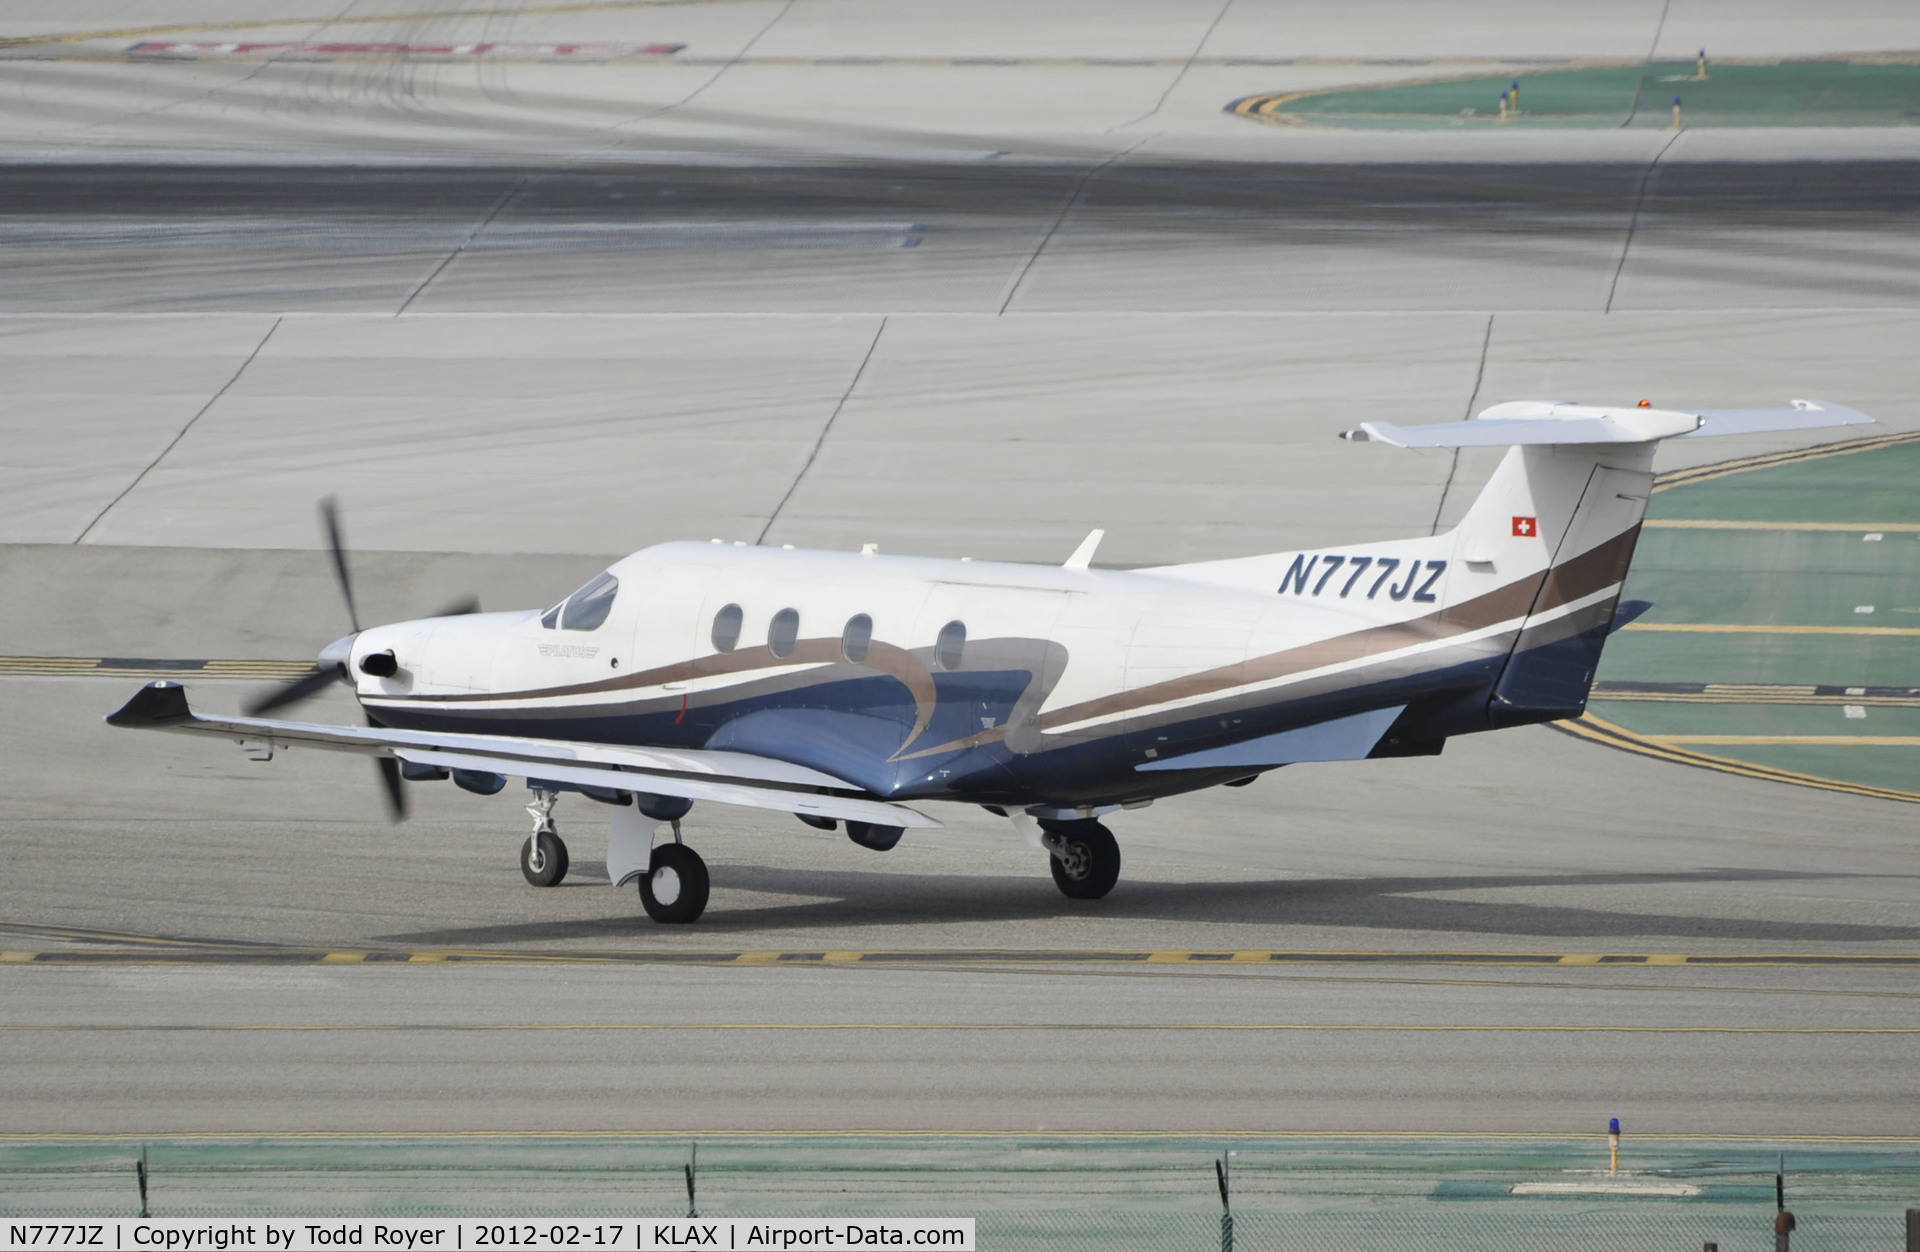 N777JZ, 2007 Pilatus PC-12/47 C/N 817, Taxiing for Departure at LAX